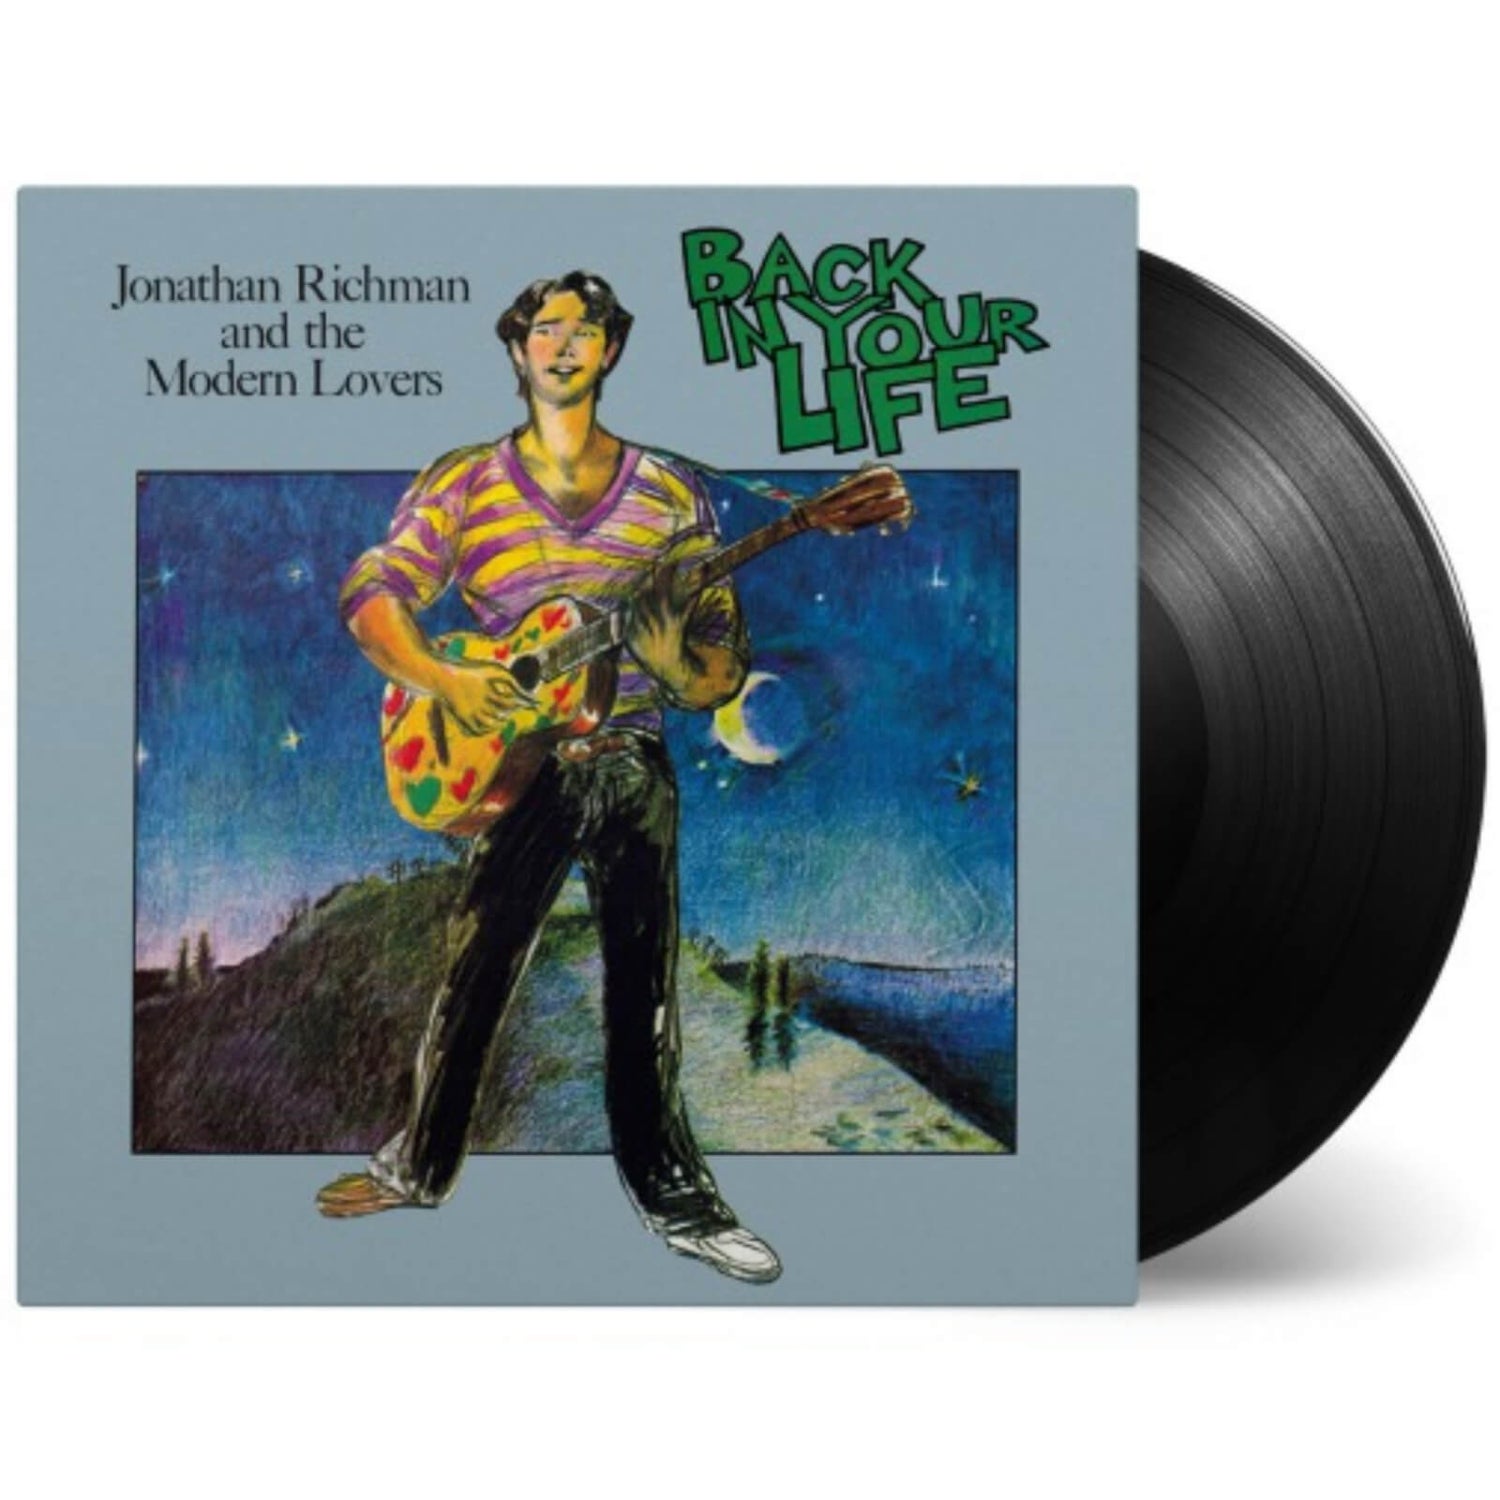 Jonathan Richman & the Modern Lovers - Back In Your Life 180g Vinyl